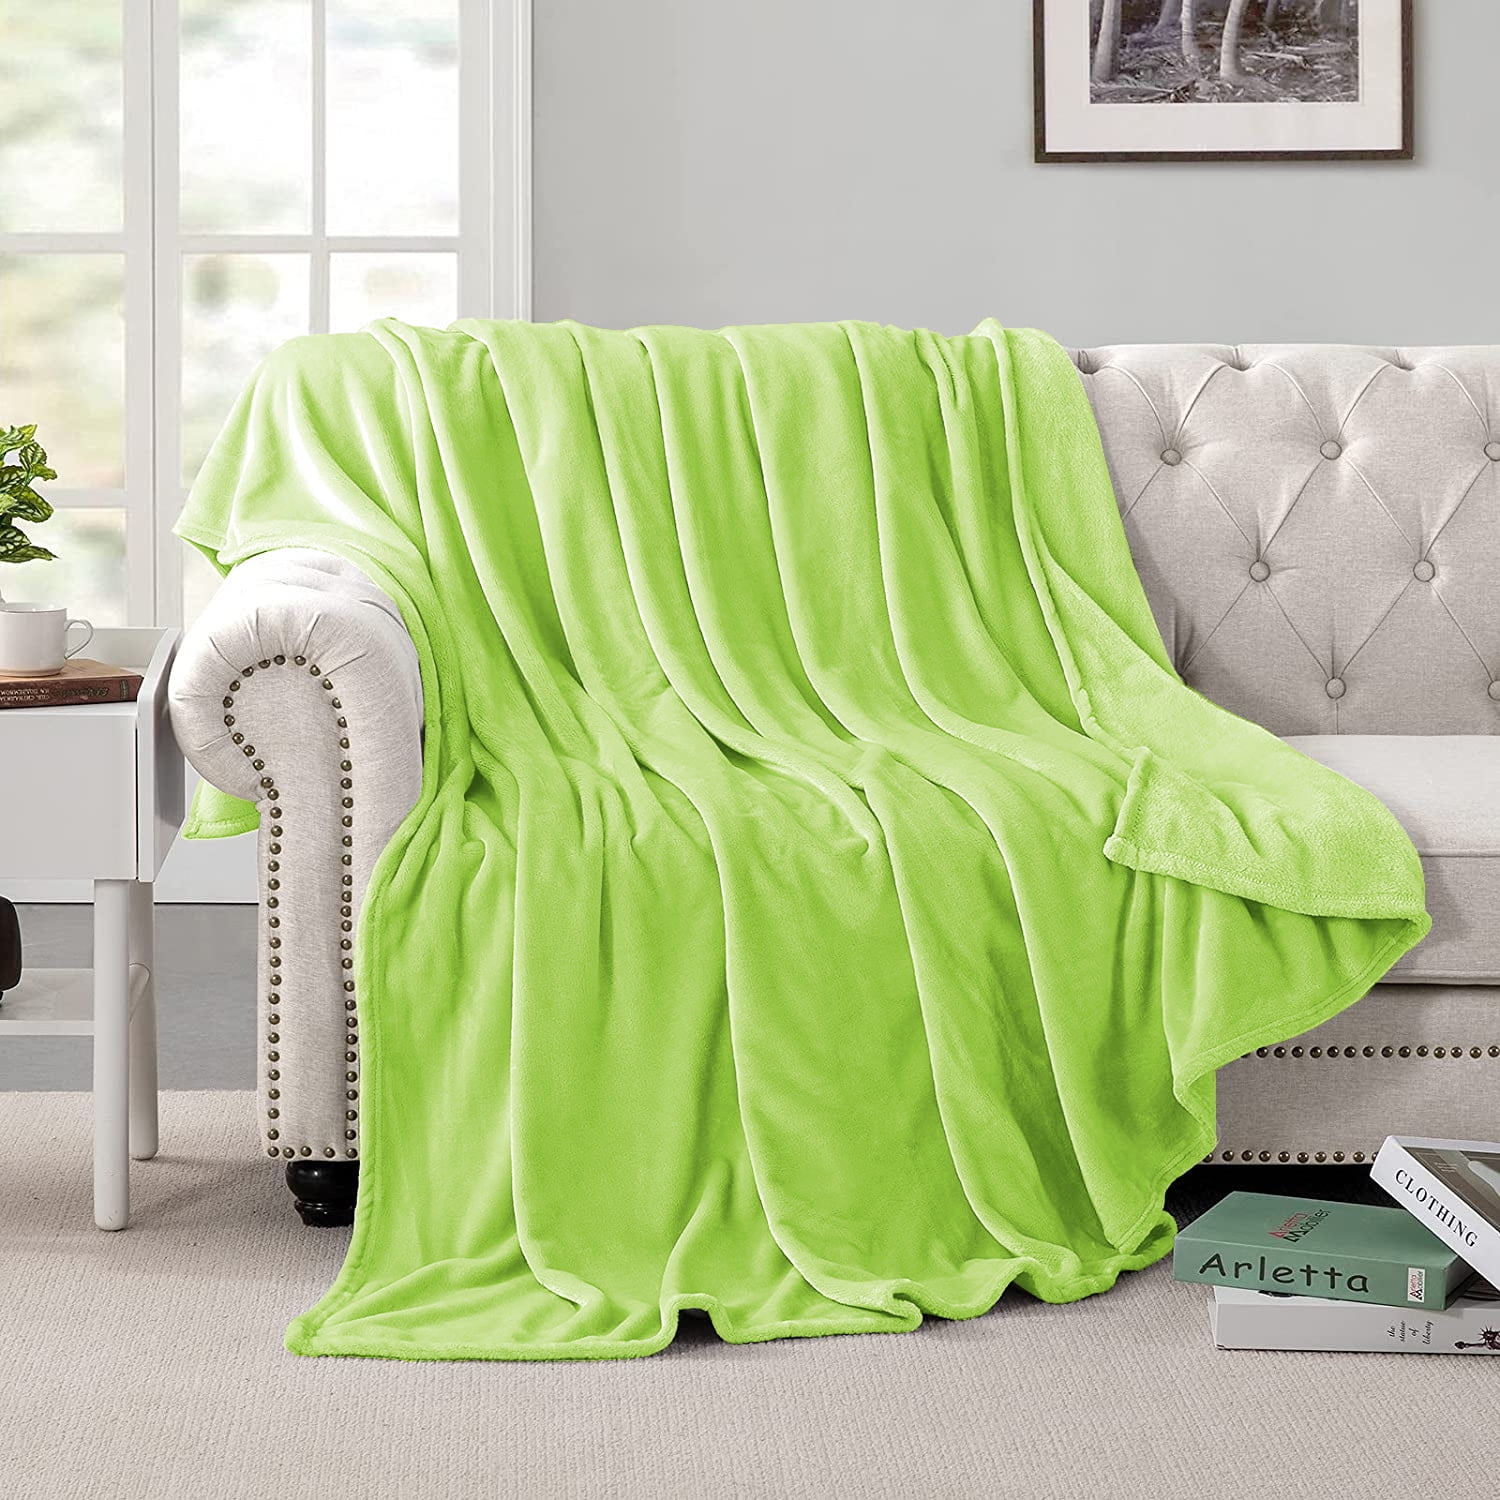 Green Picnic The Beach Size 50x70cm Soft Solid Color Thickened Flannel Fleece Throw Blanket Sofa Bedroom Thermal Blanket Cozy Couch Bed Blanket Sheets All Season Lightweight Blanket for Camping